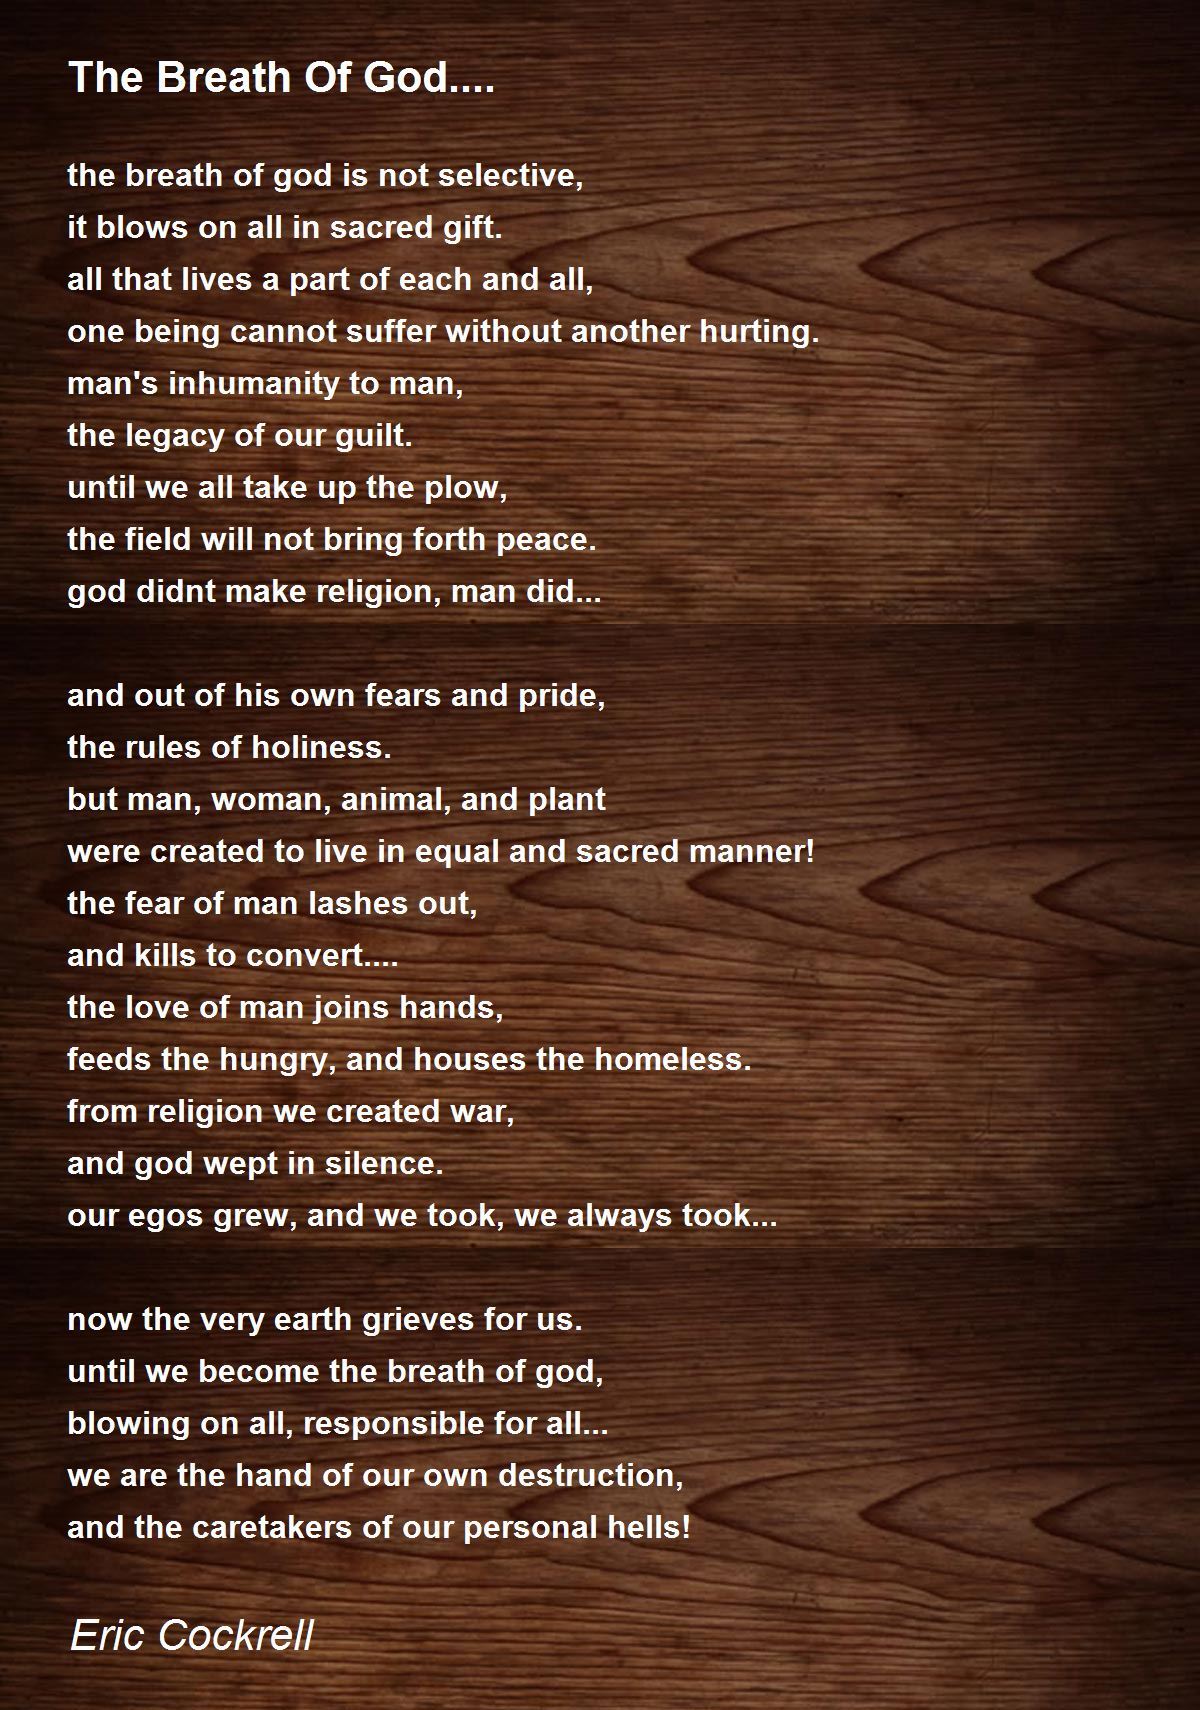 The Breath Of God.... Poem by Eric Cockrell - Poem Hunter